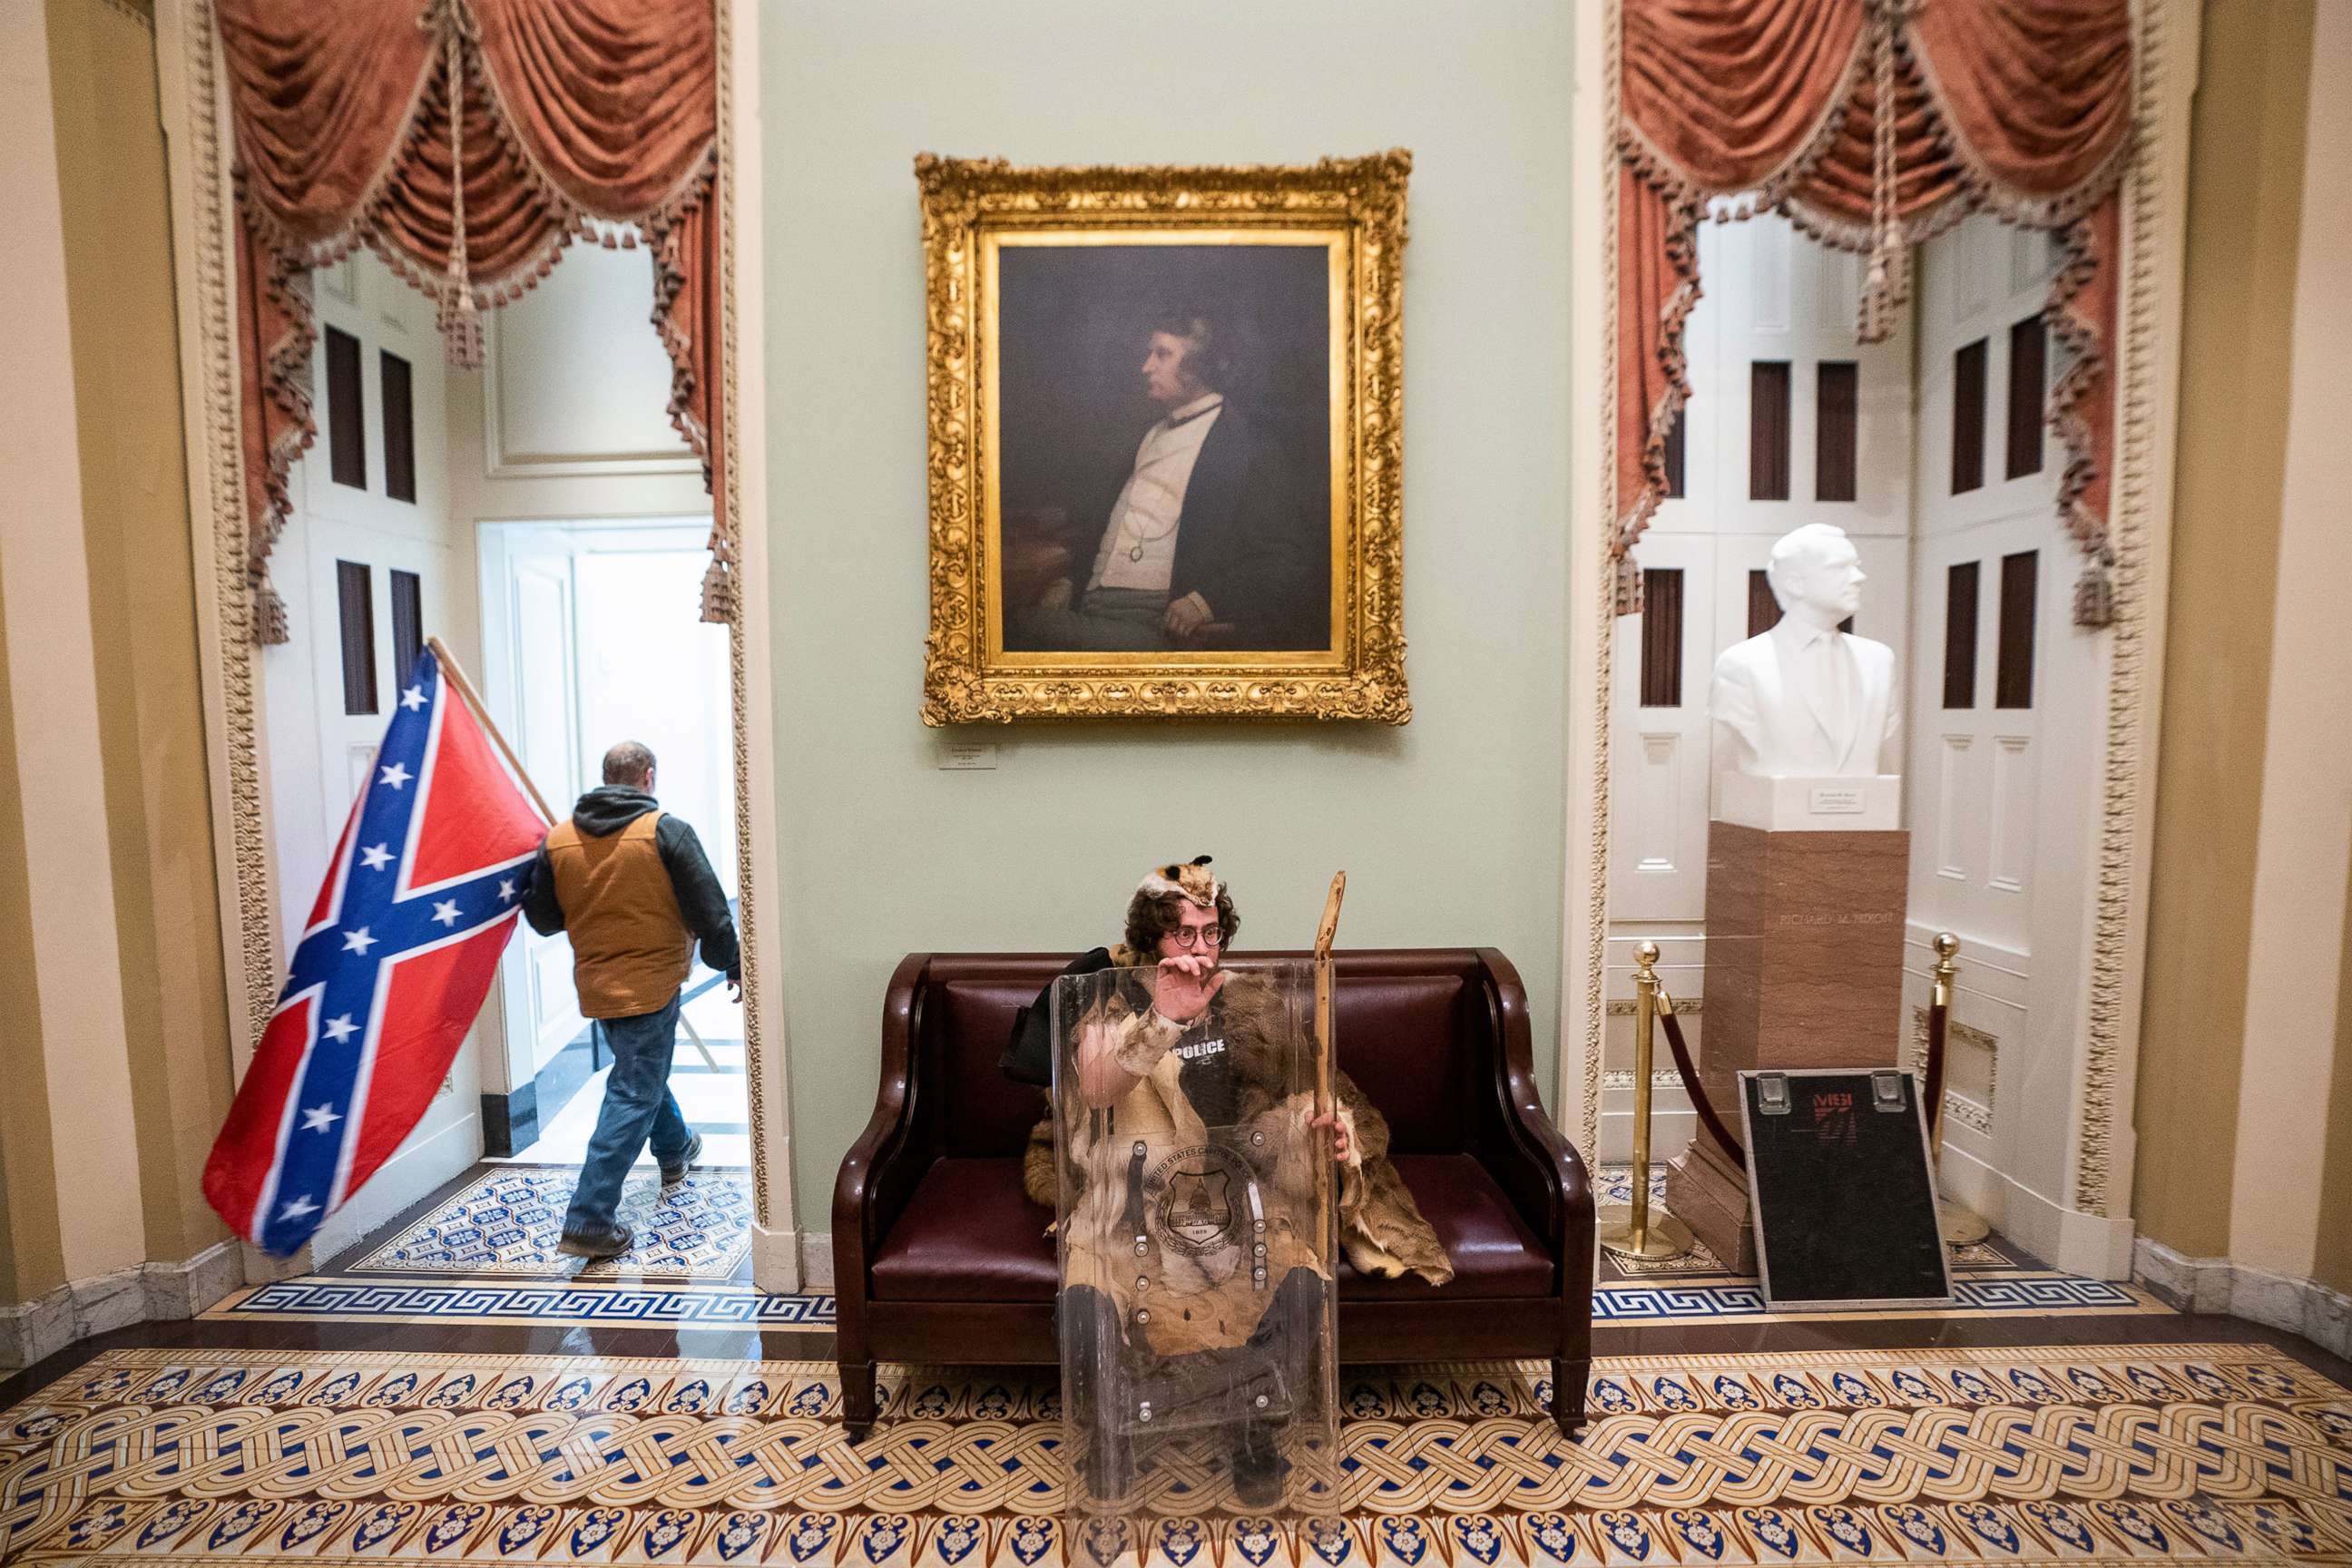 A supporter of President Donald Trump, Aaron Mostofsky who is identified in his arrest warrant, sits outside the Senate chamber after breaching Capitol security in Washington, Jan. 6, 2021.